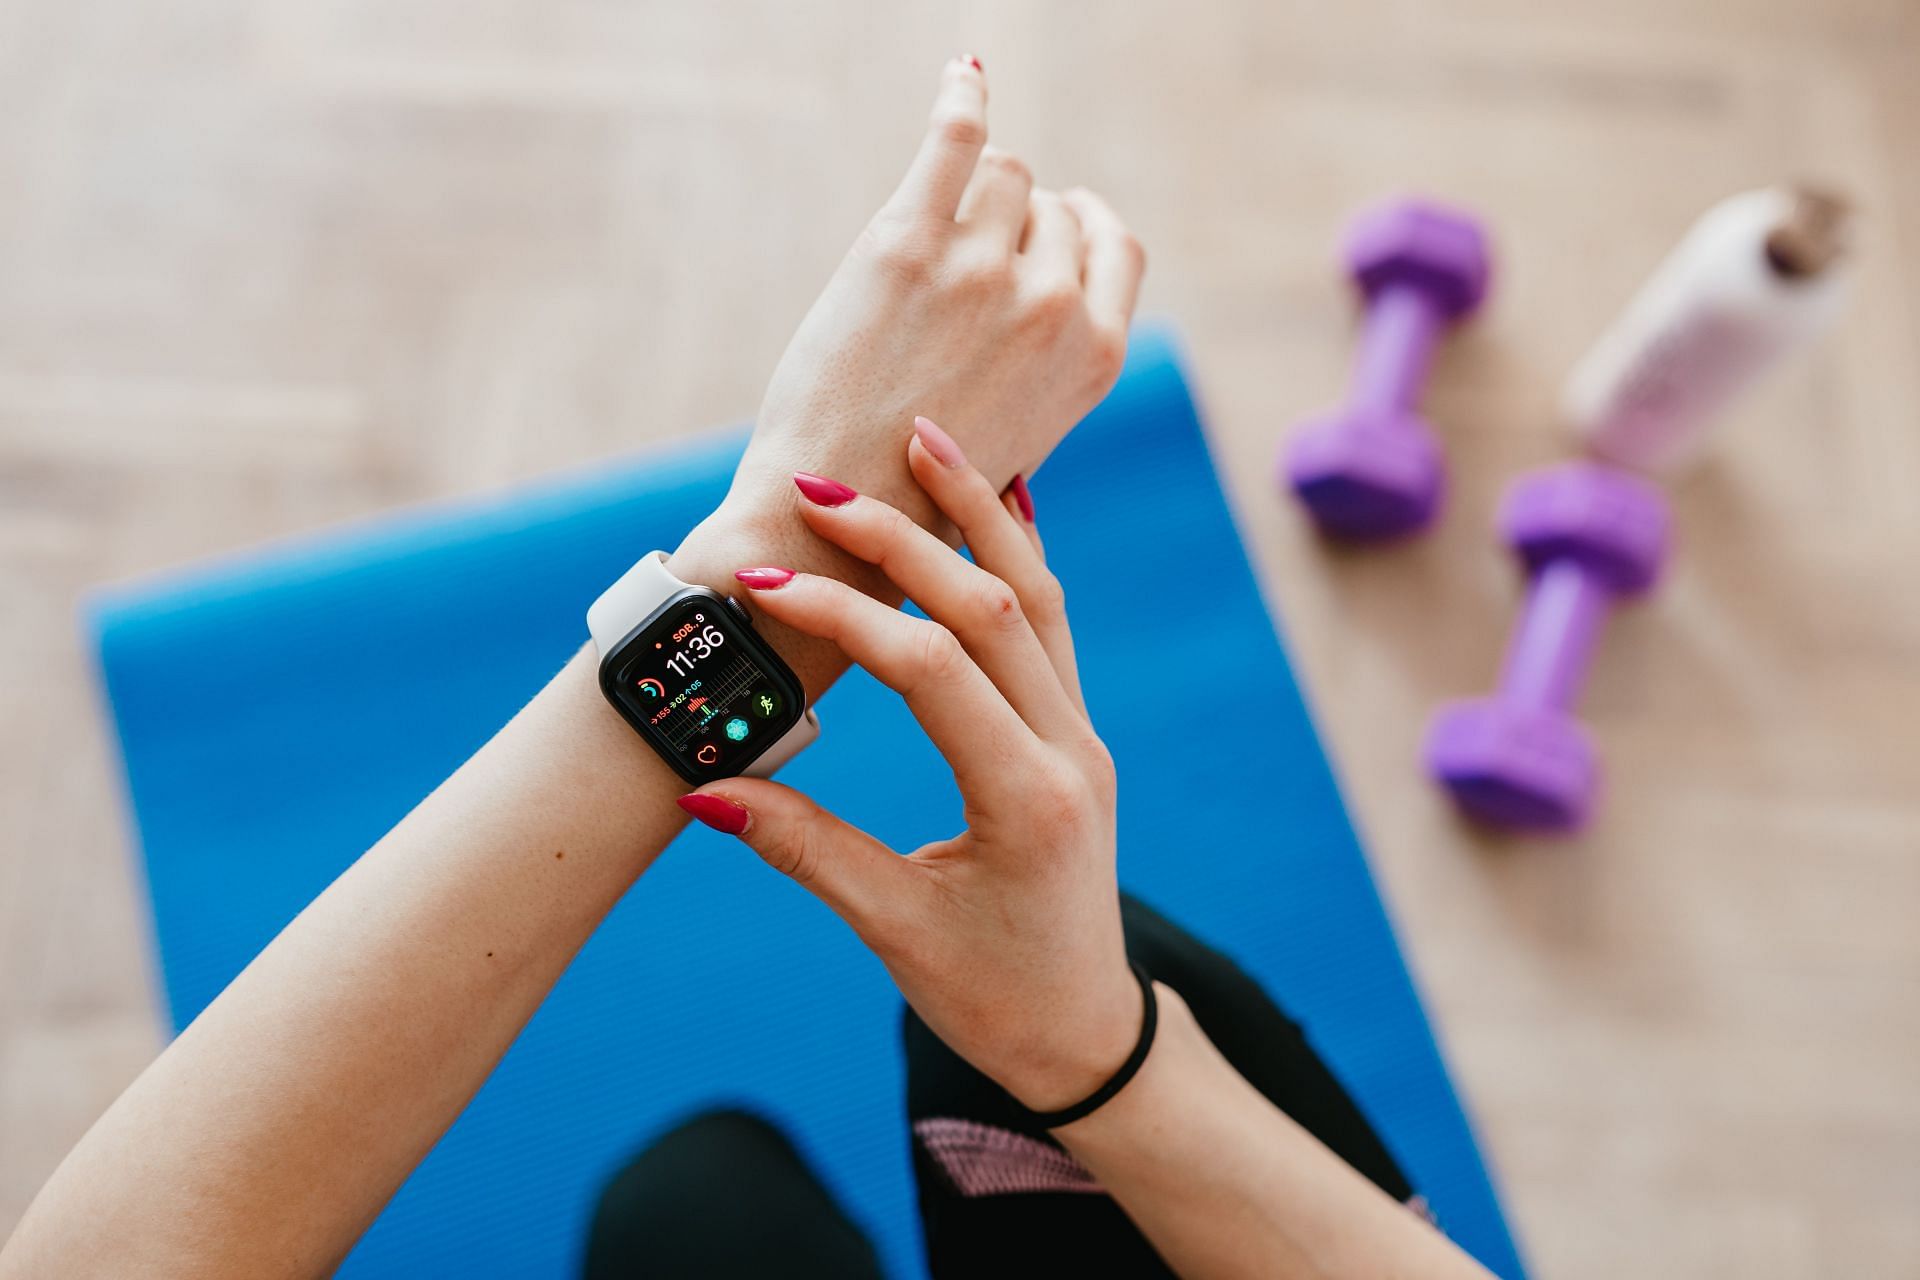 Top 5 fitness trackers to help you stay active and healthy (Image via Pexels)